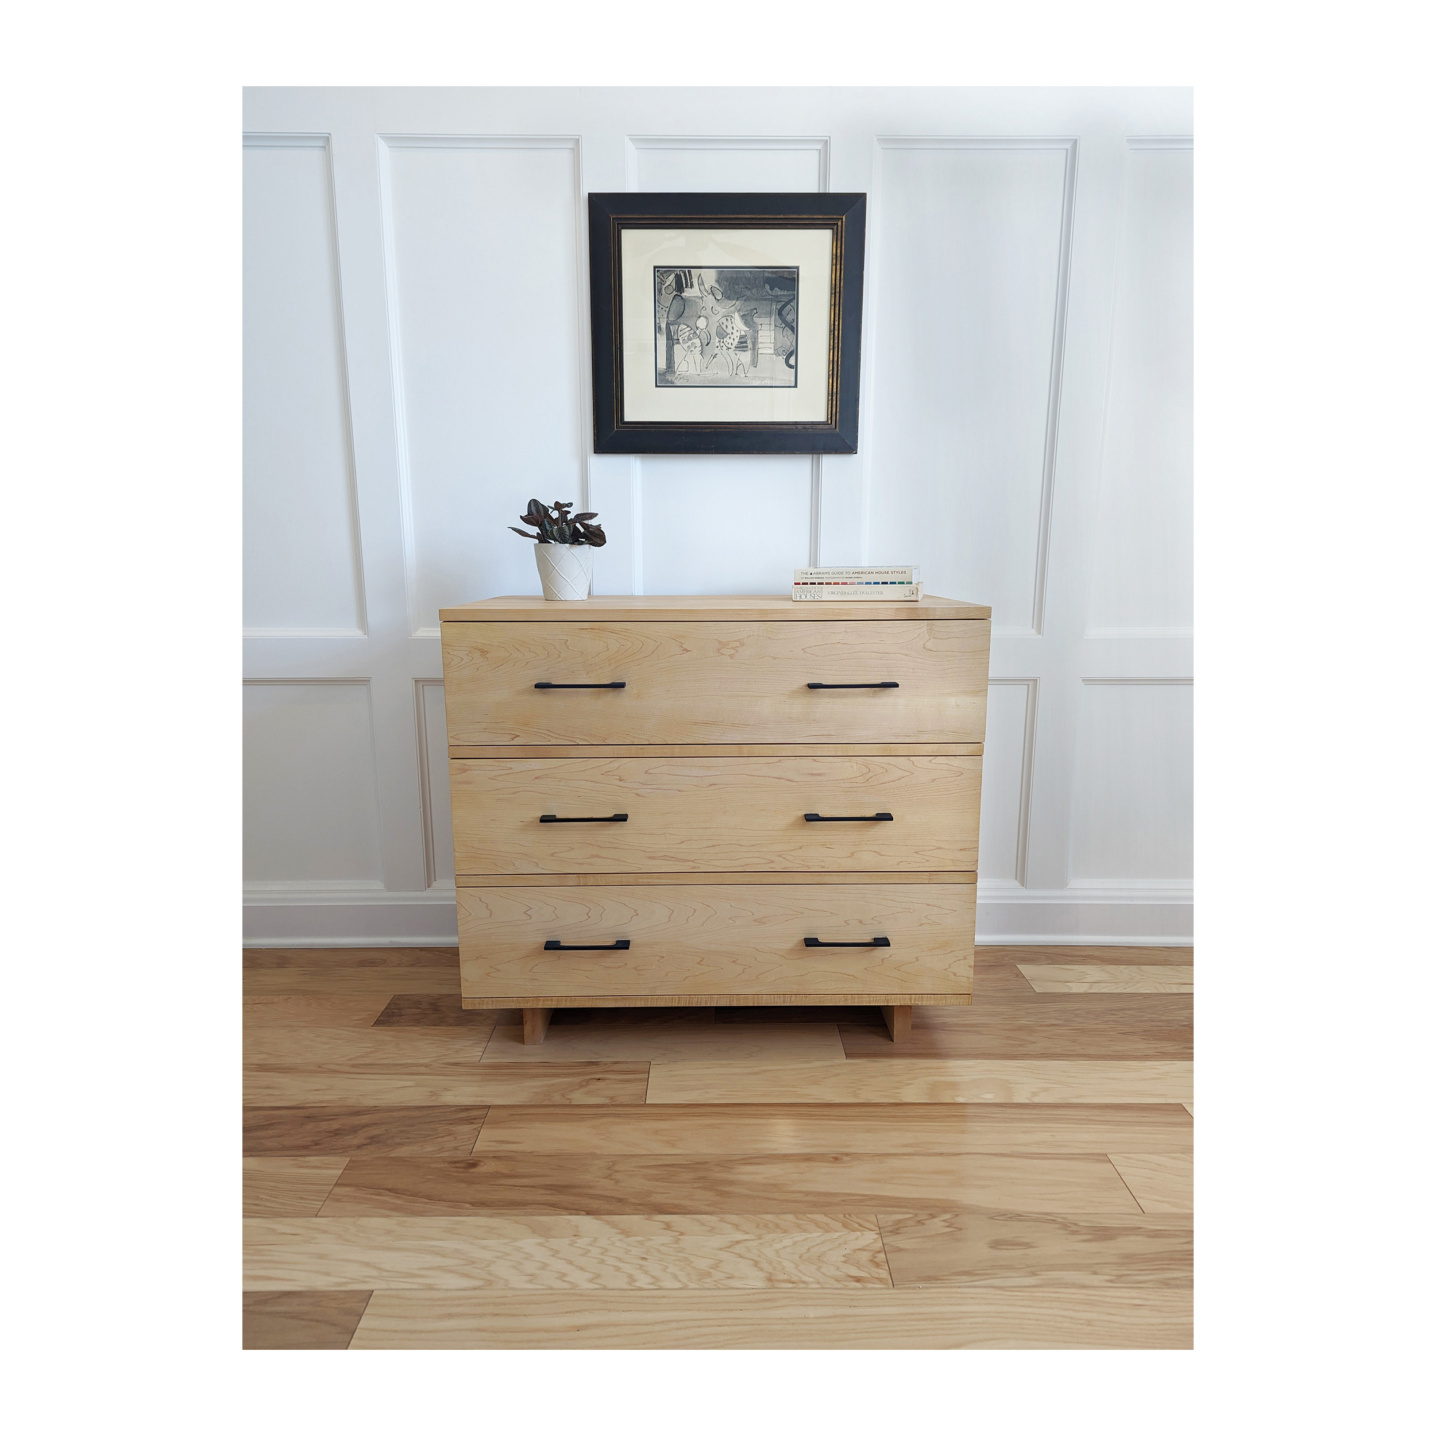 Solid Maple Dresser 36" in width with self closing drawers--Made by 57NorthPlank Tailored Modern Furniture